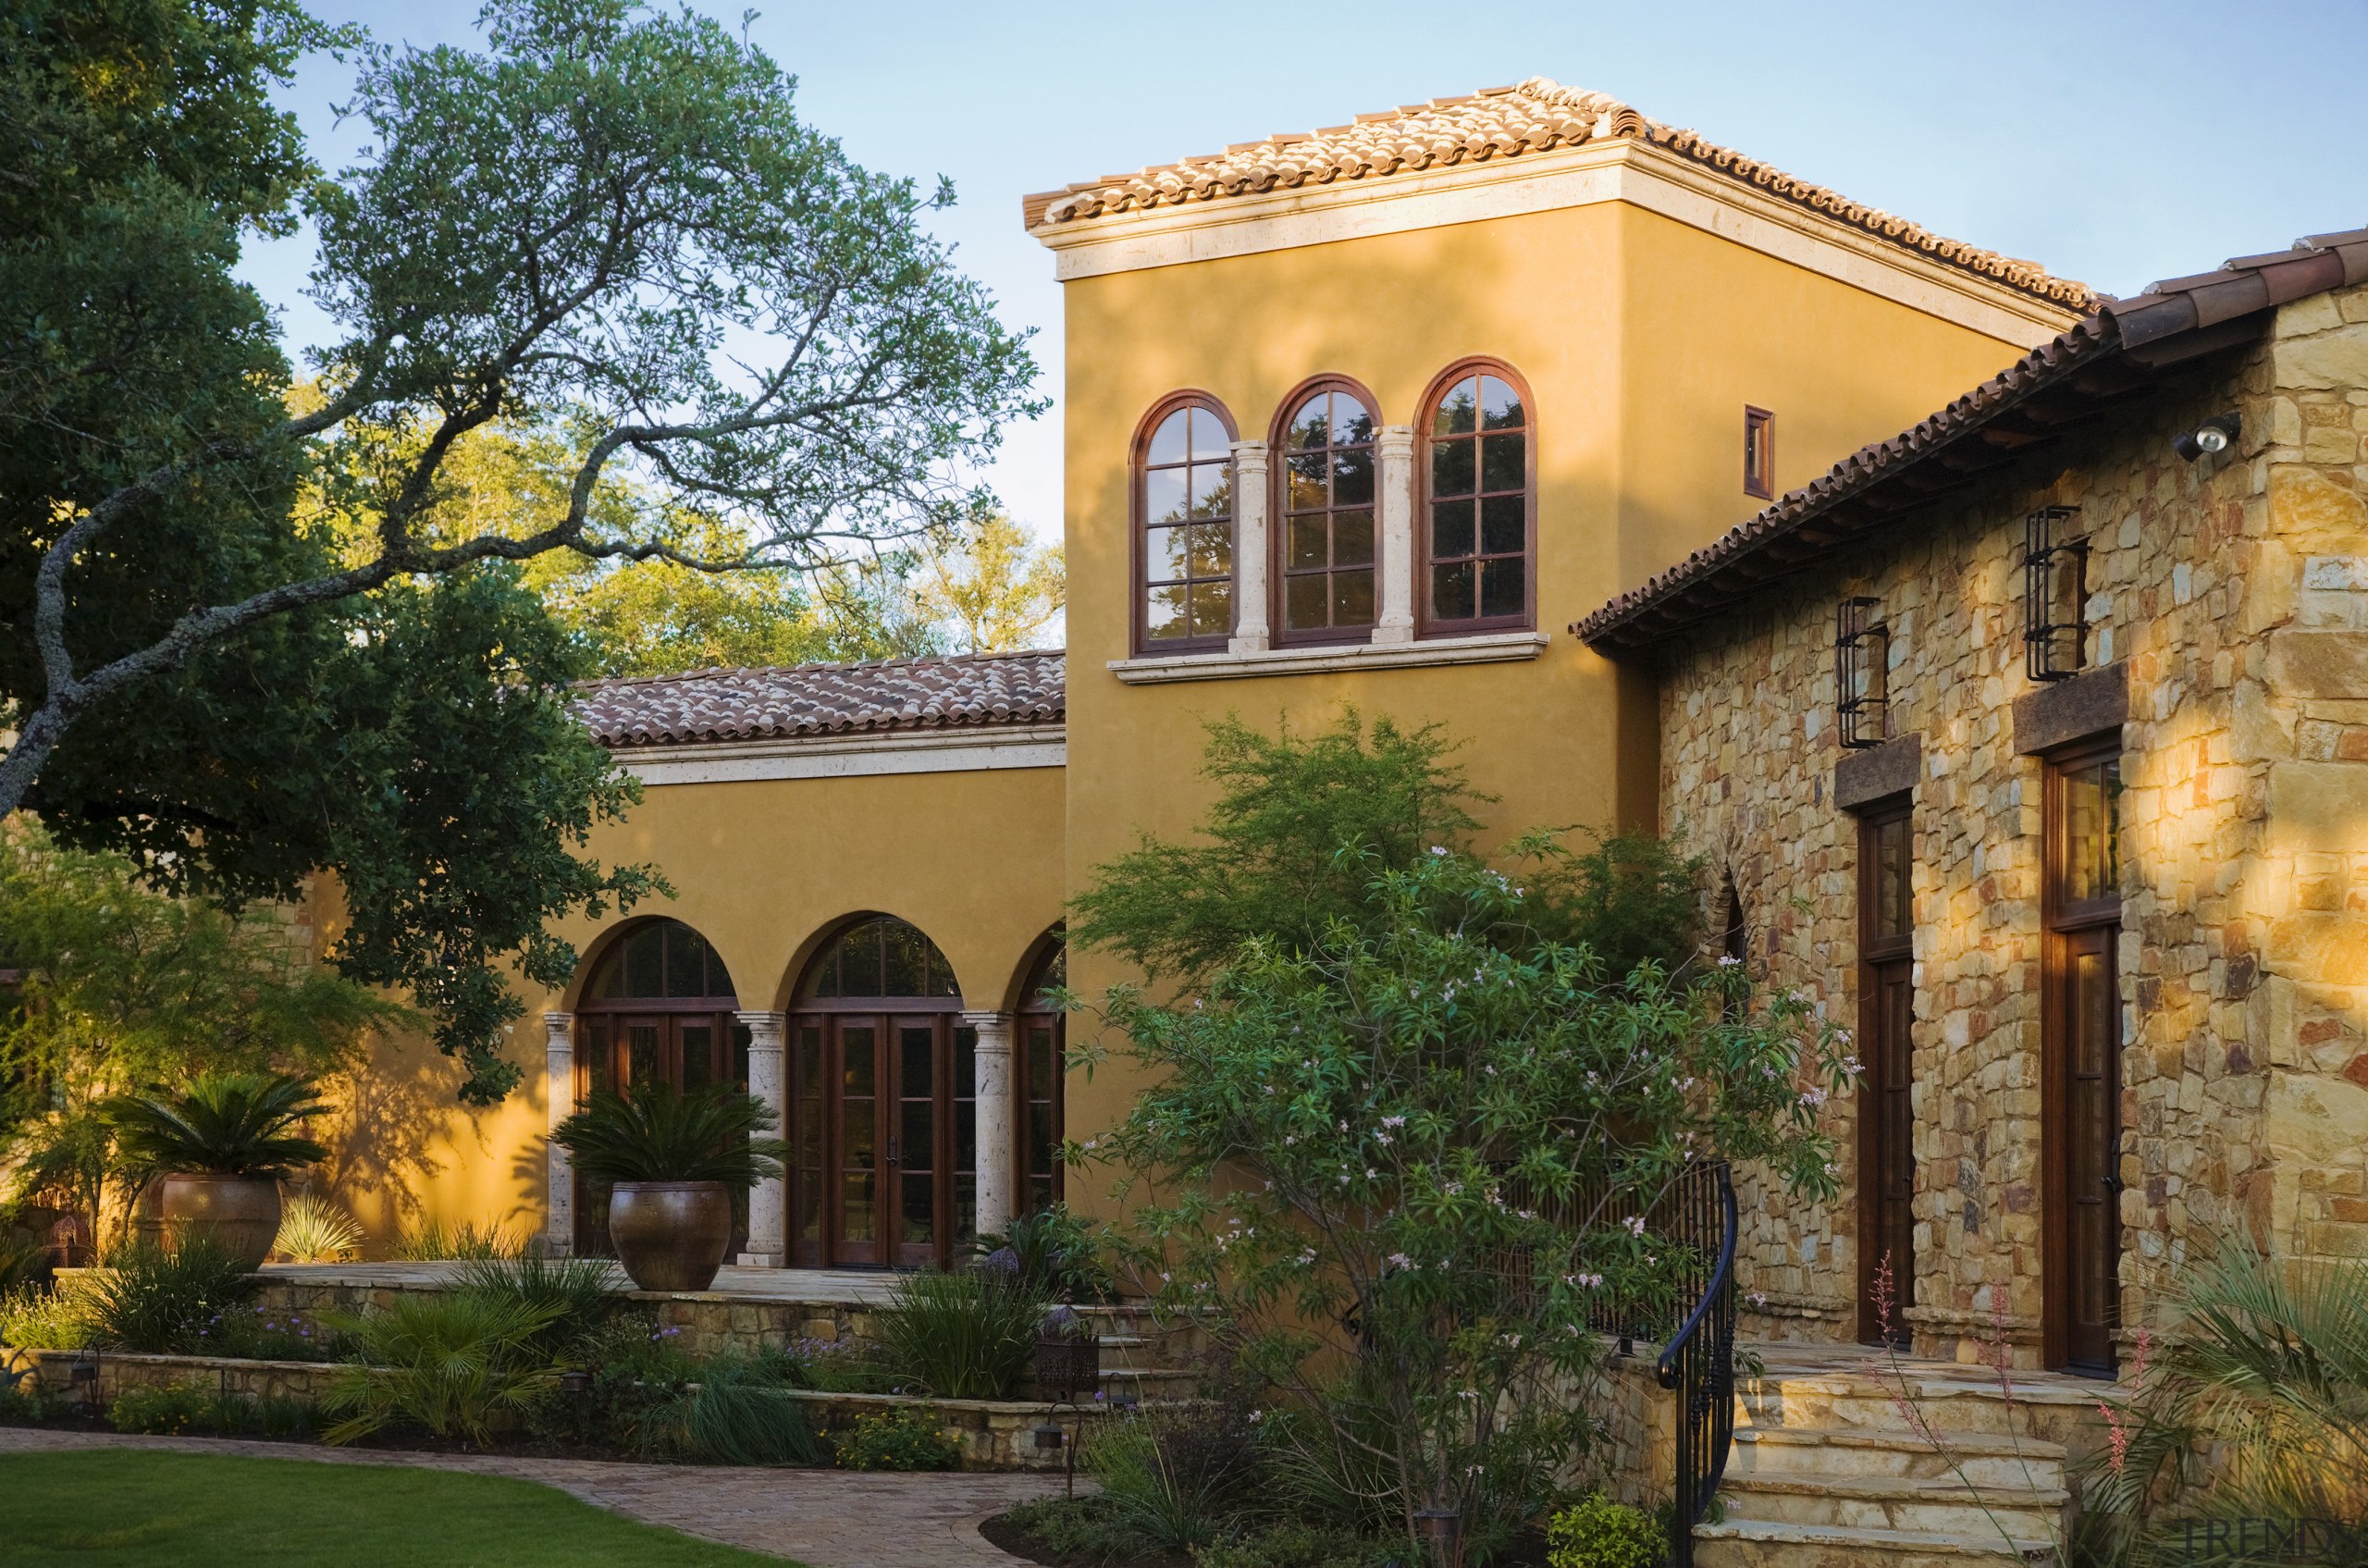 Image of the exterior of this new home. architecture, building, courtyard, estate, facade, hacienda, historic house, home, house, mansion, property, real estate, tree, villa, window, brown